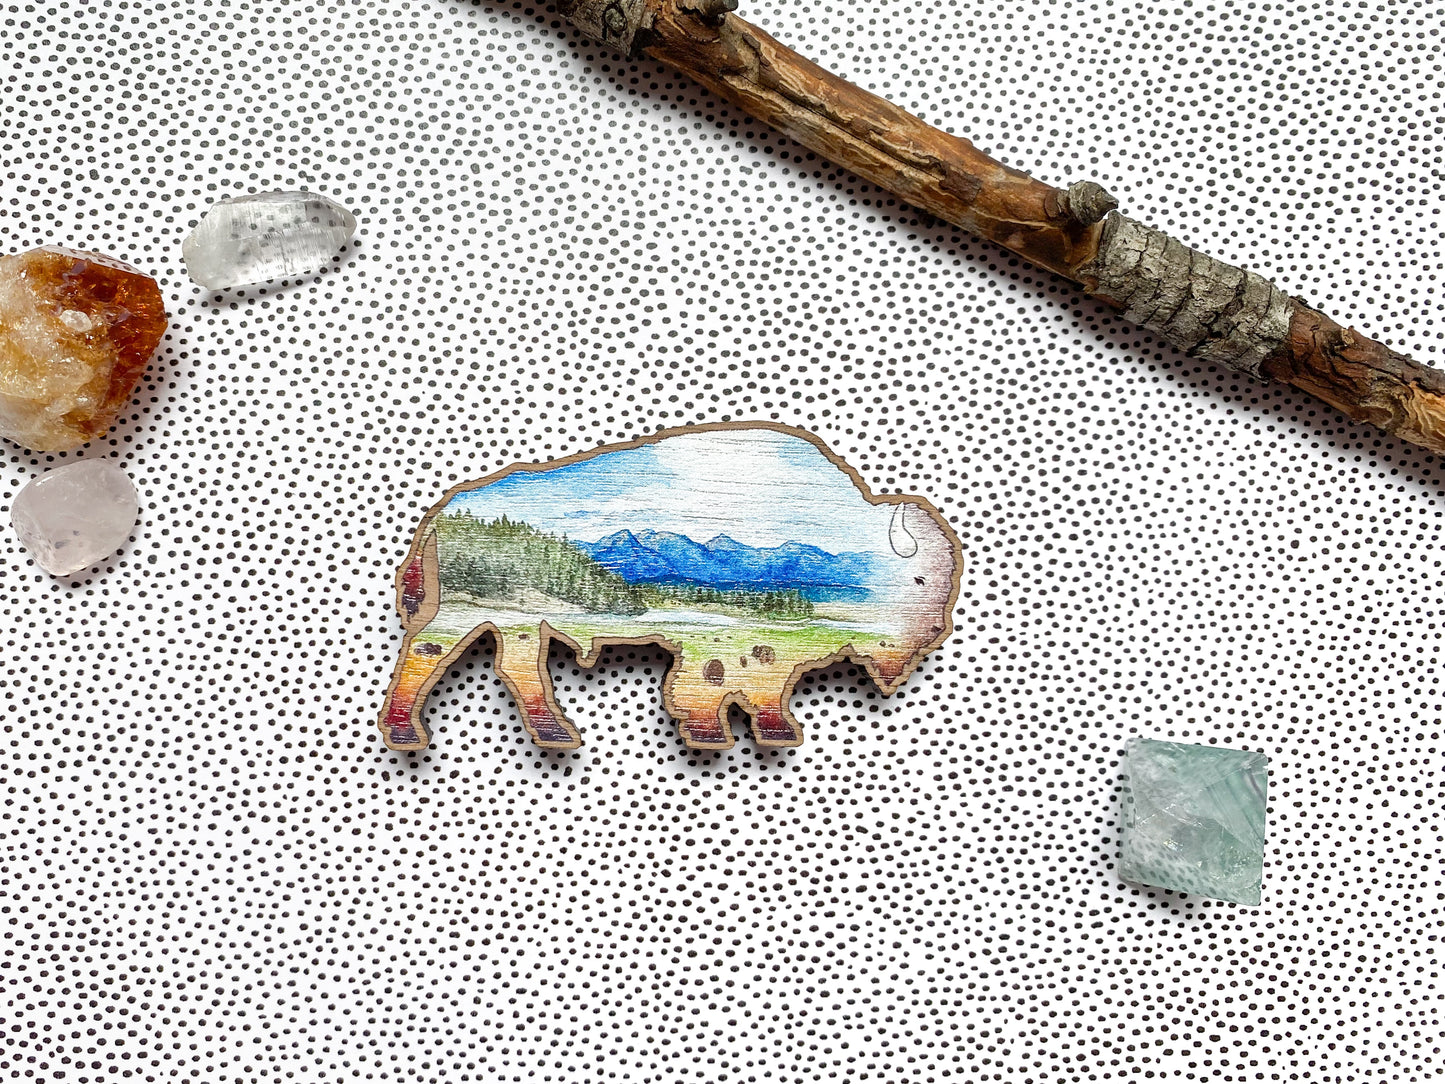 Yellowstone Bison Wood Magnet